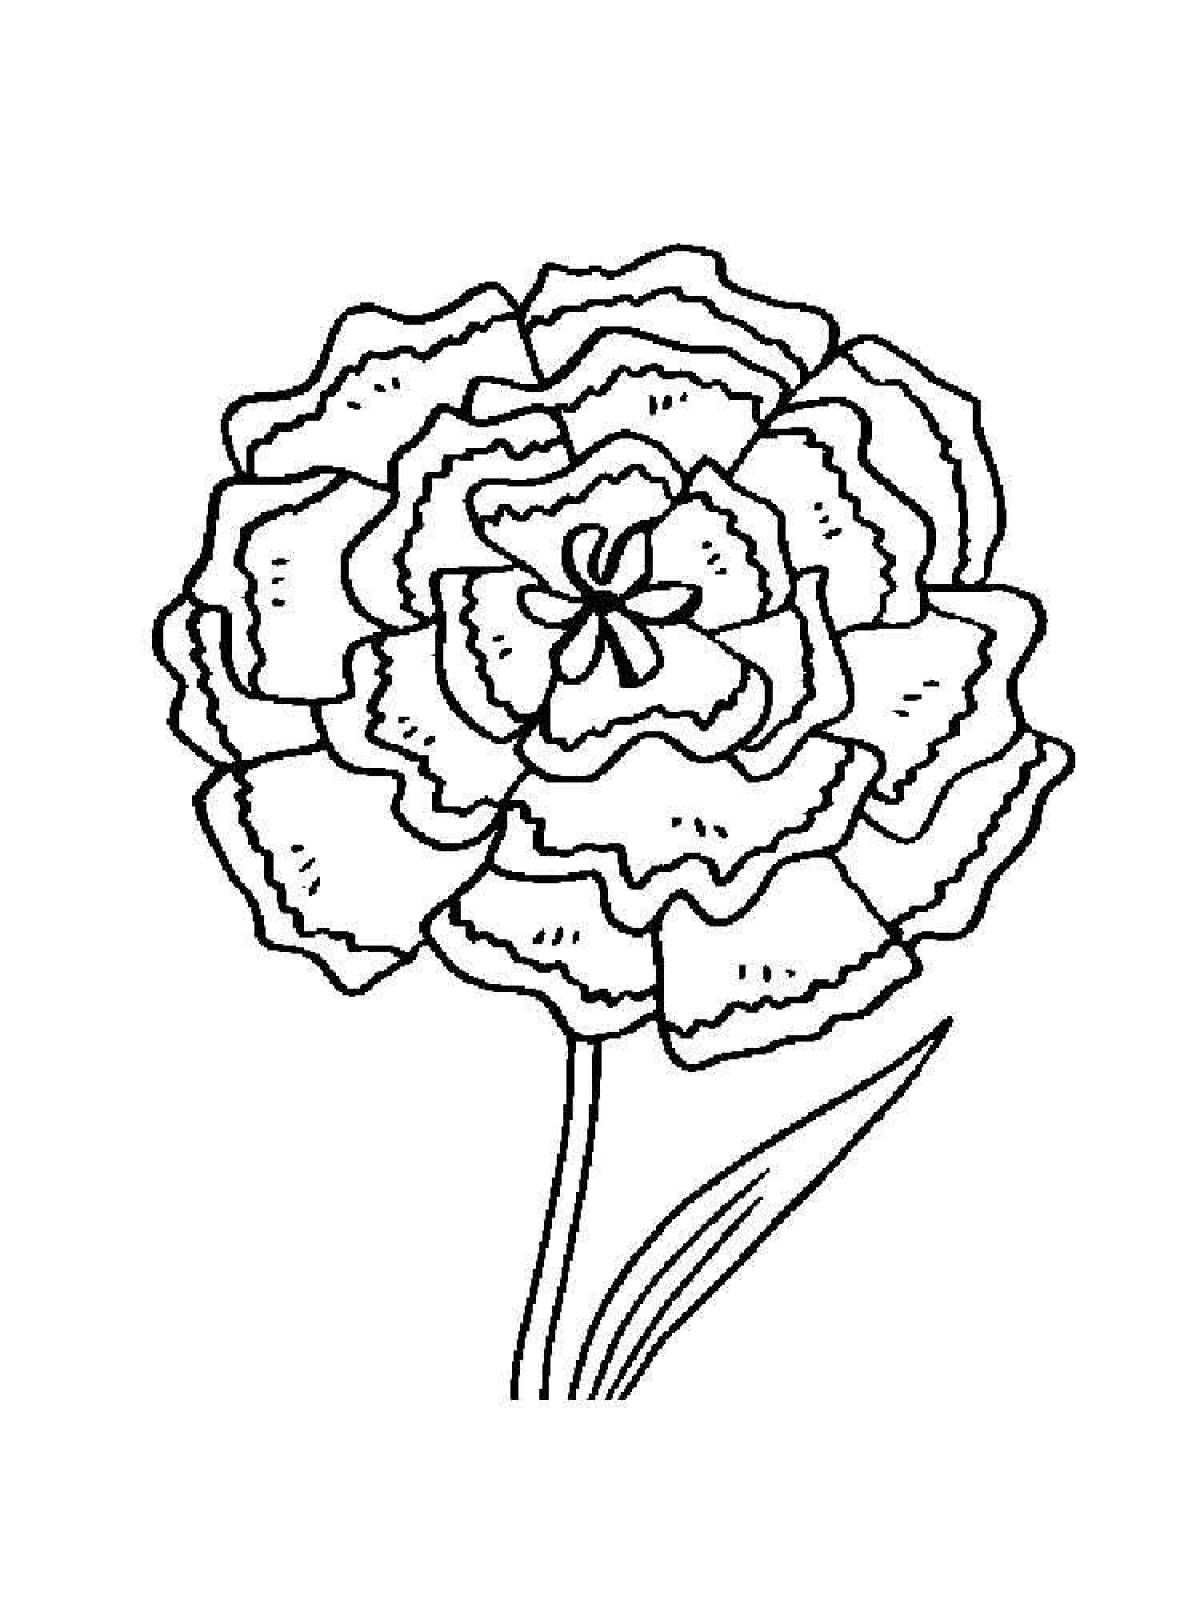 Coloring book shining carnation for students